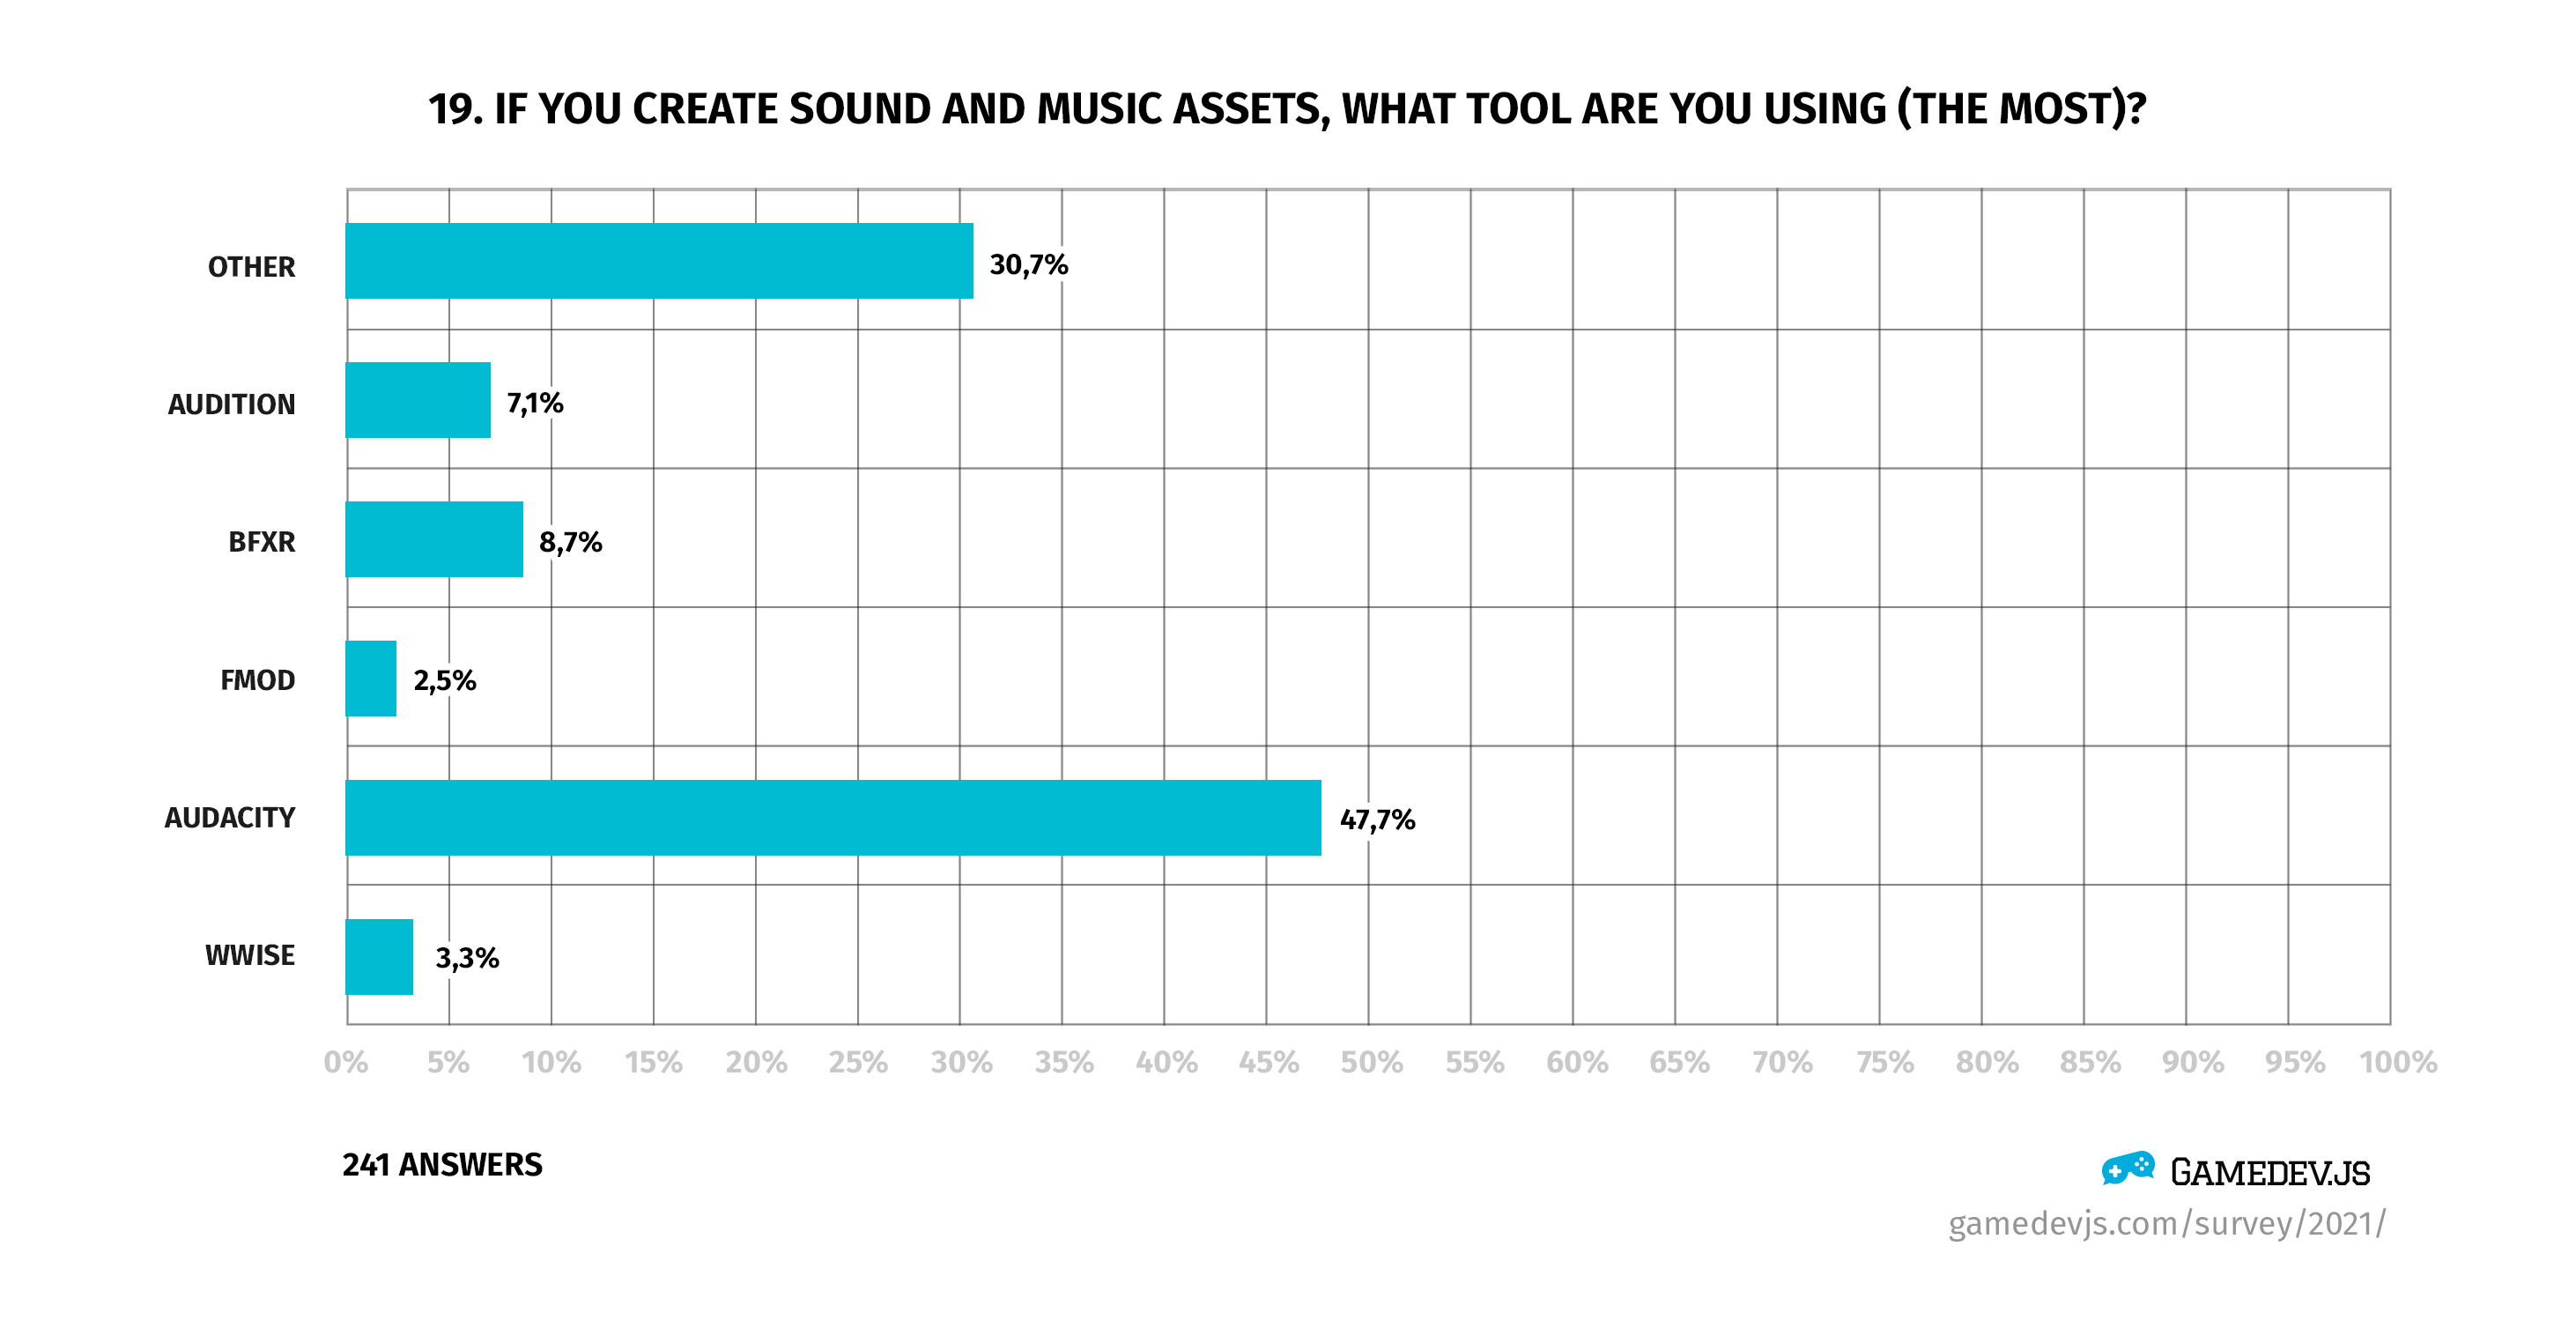 Gamedev.js Survey 2021 - Question #19: If you create sound and music assets, what tool are you using (the most)?